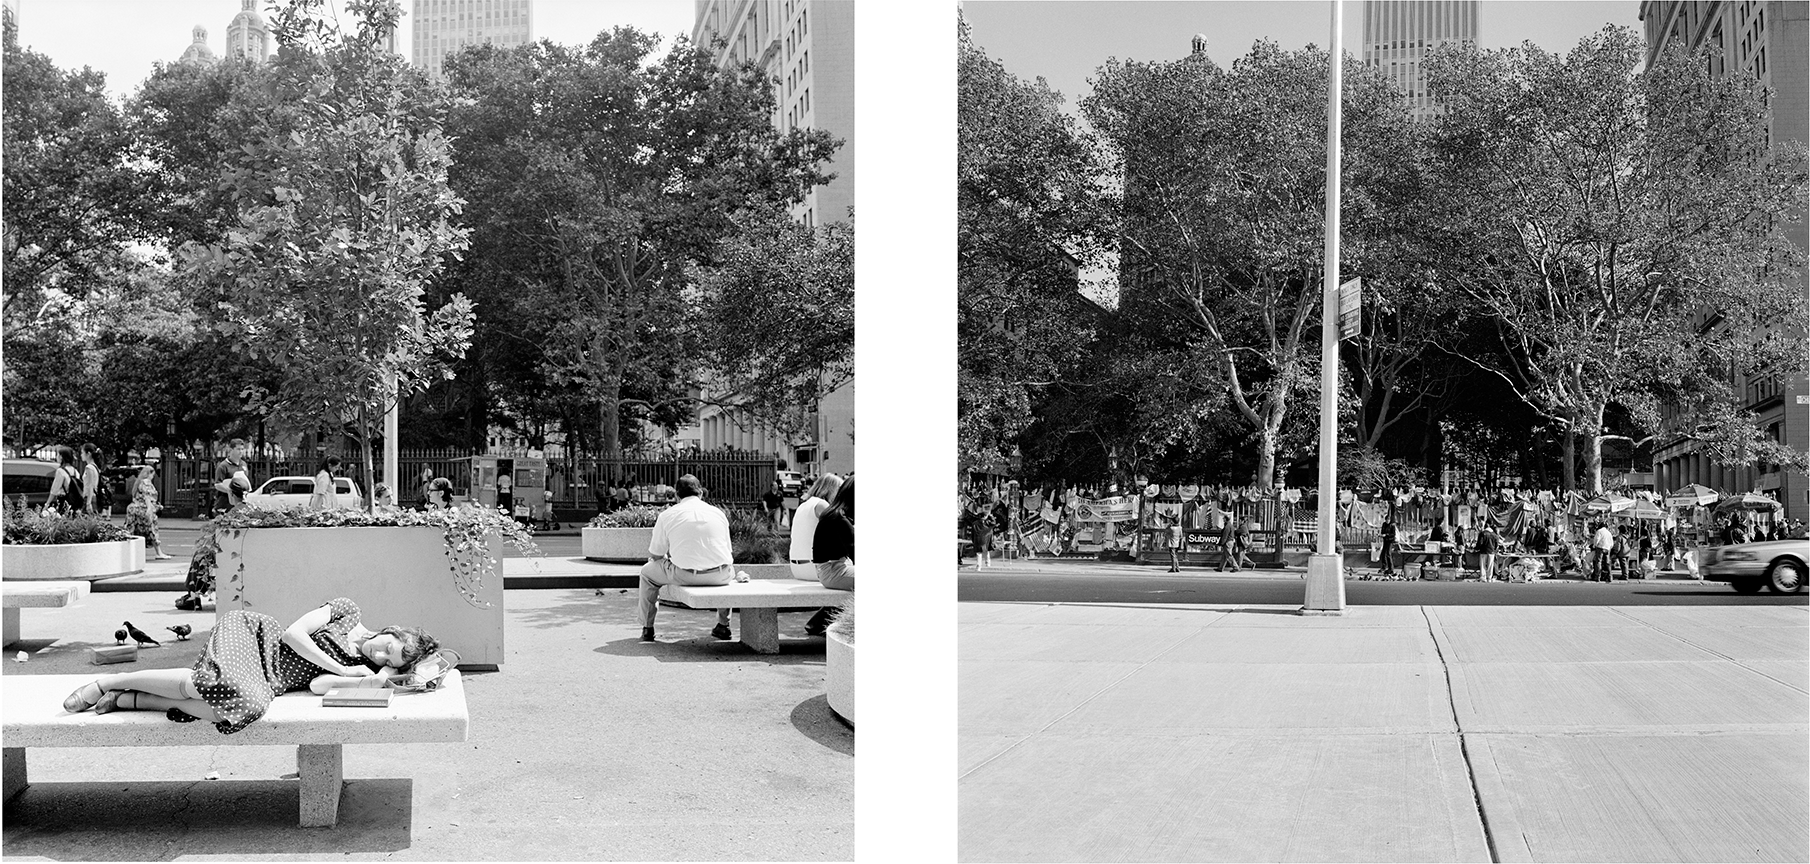  Northeast corner of World Trade Center Plaza facing Church Street, July 2001 (left) and August 2002. 